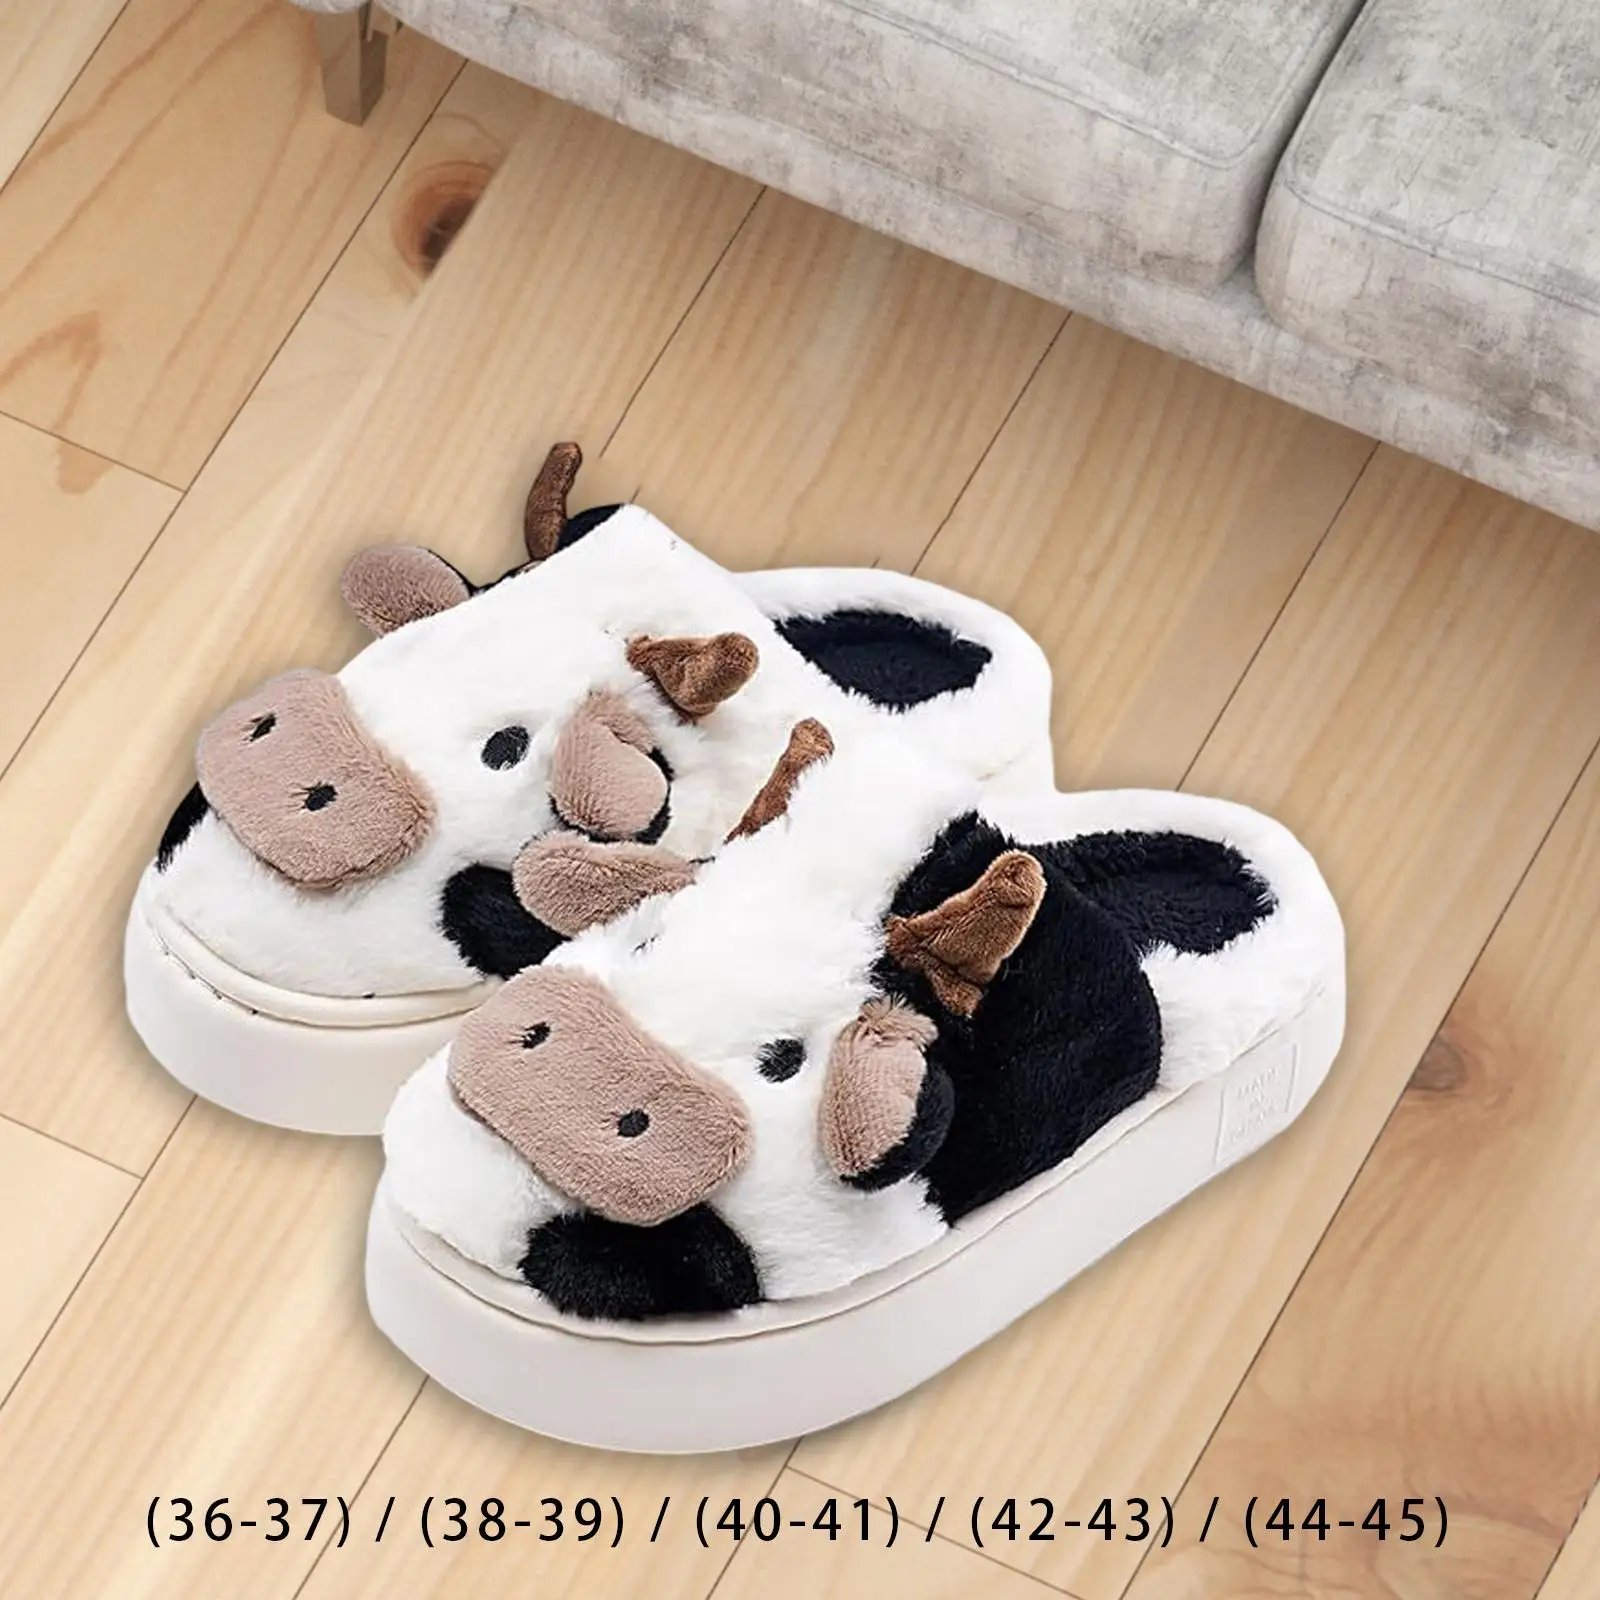 Winter Cow Plush Slippers Casual Birthday Gift Warm House Slippers Animal Indoor Shoes for Apartment Dorm Travel Bedroom Female